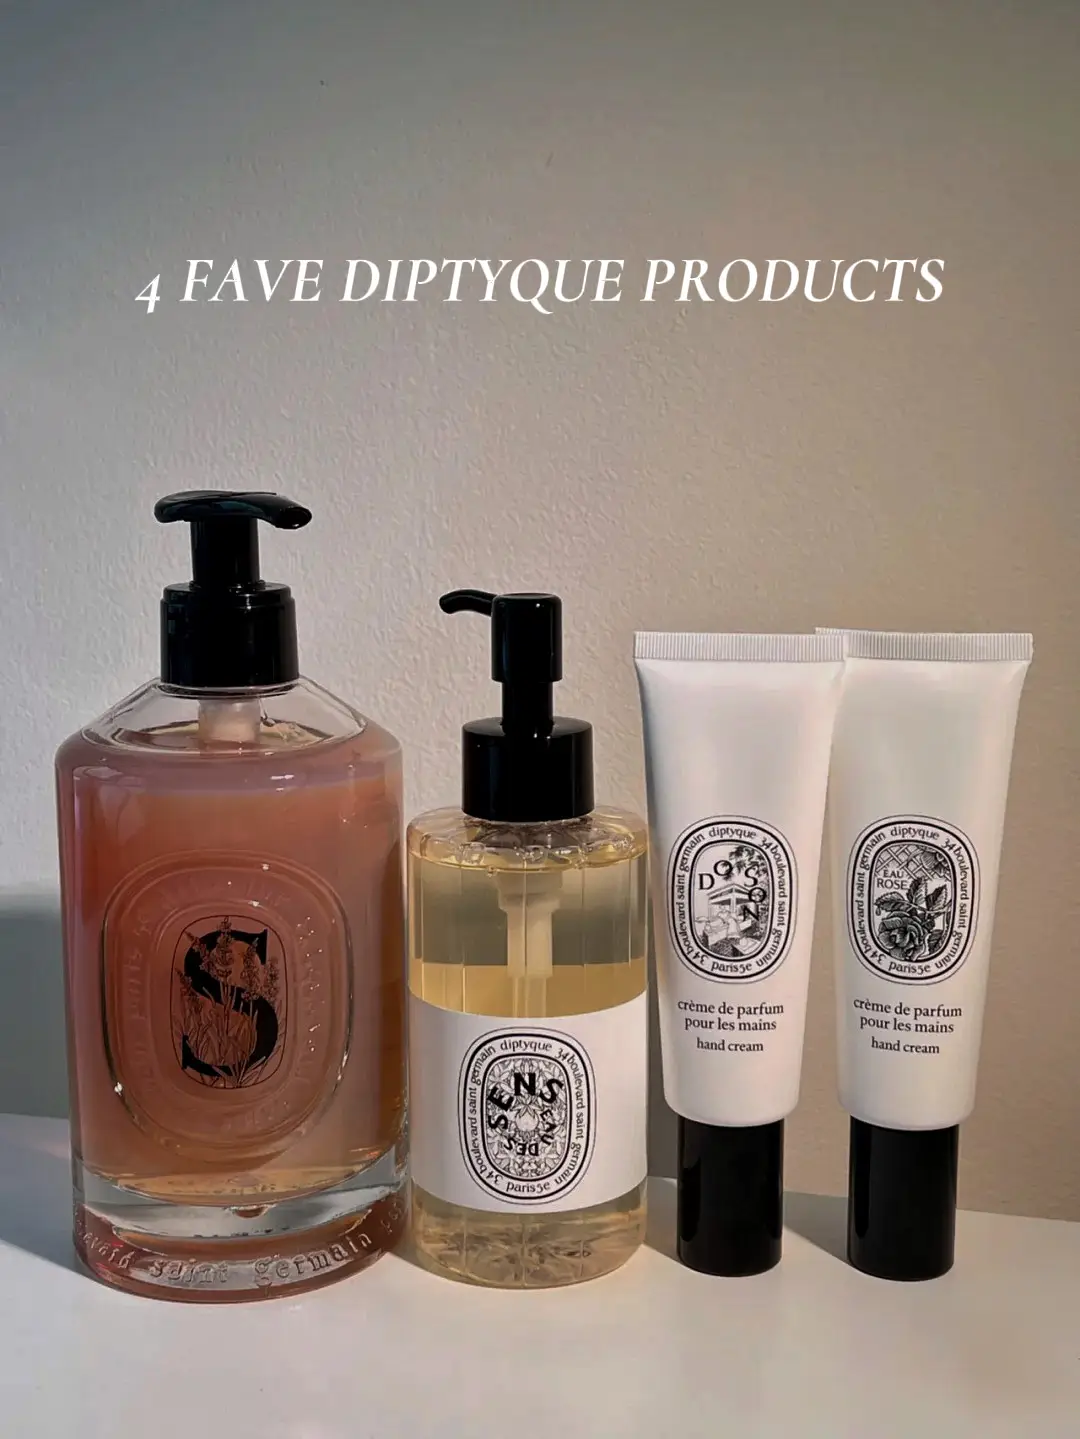 4 Favorite DIPTYQUE Products, Gallery posted by Amelix